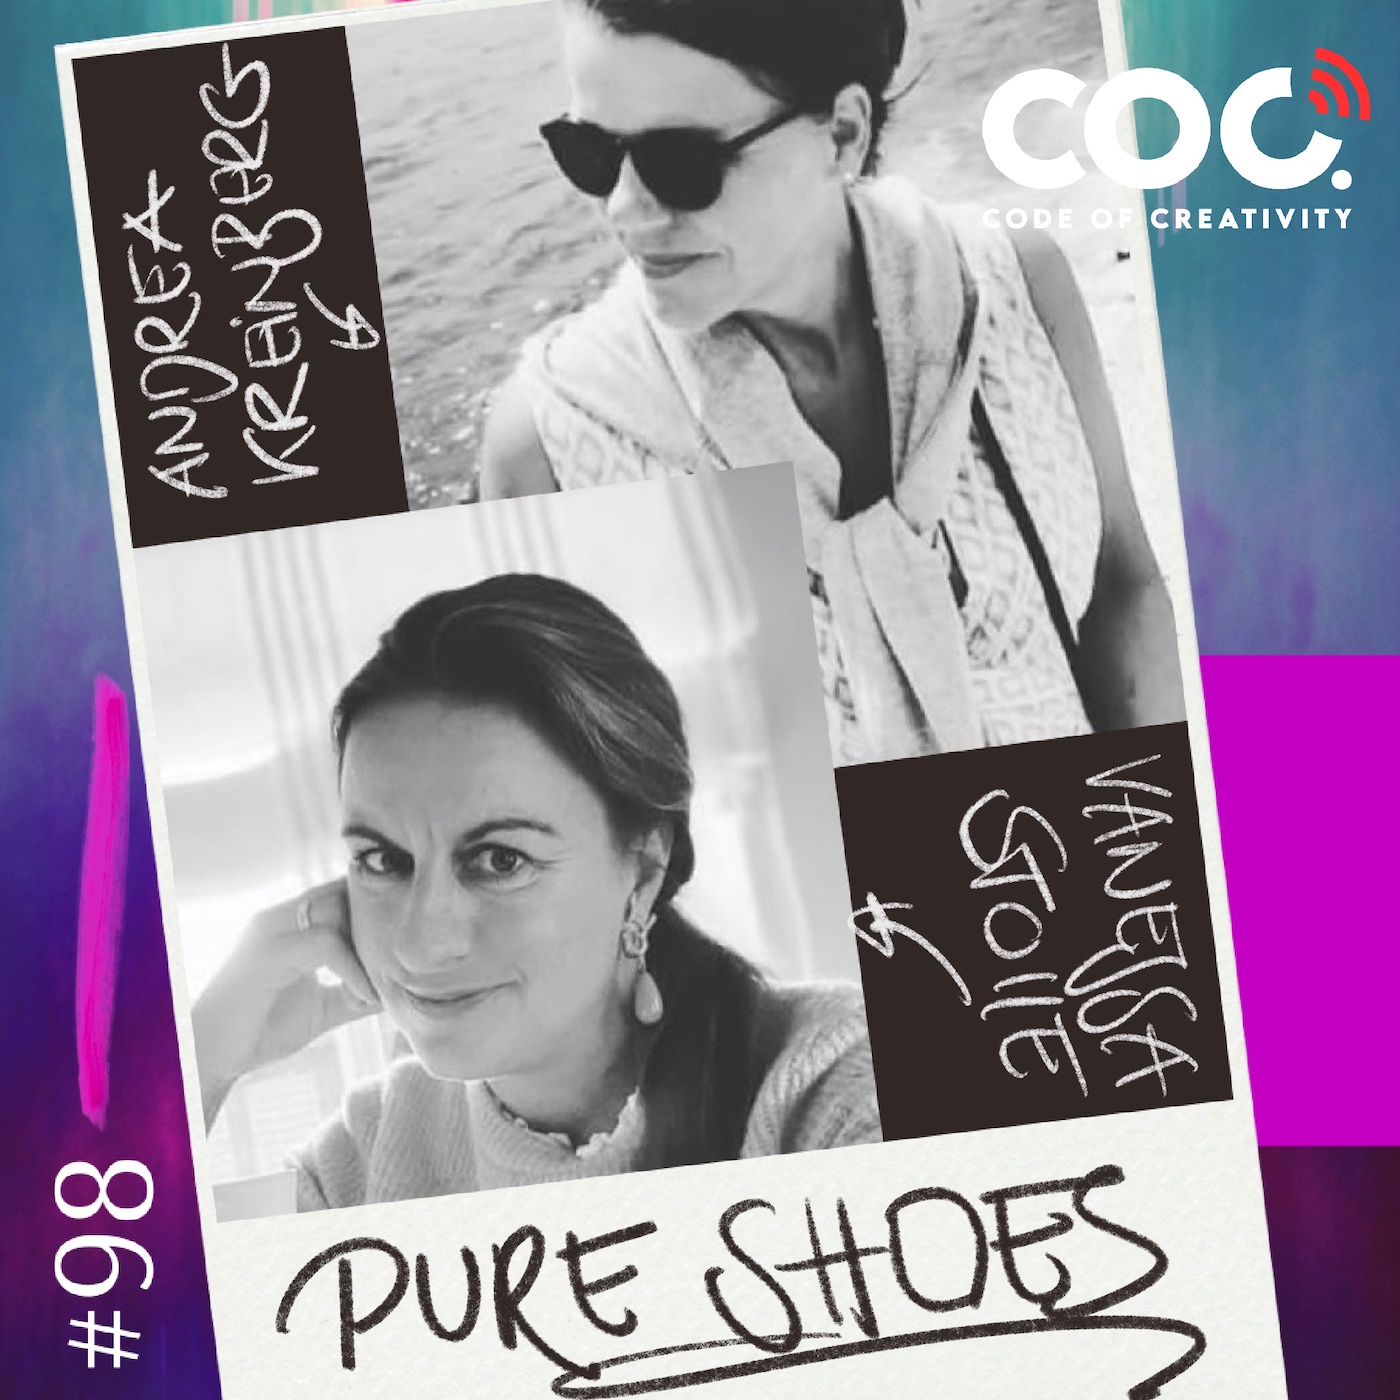 #98 Andrea Kreinberg & Vanessa Stolle - Pure shoes -